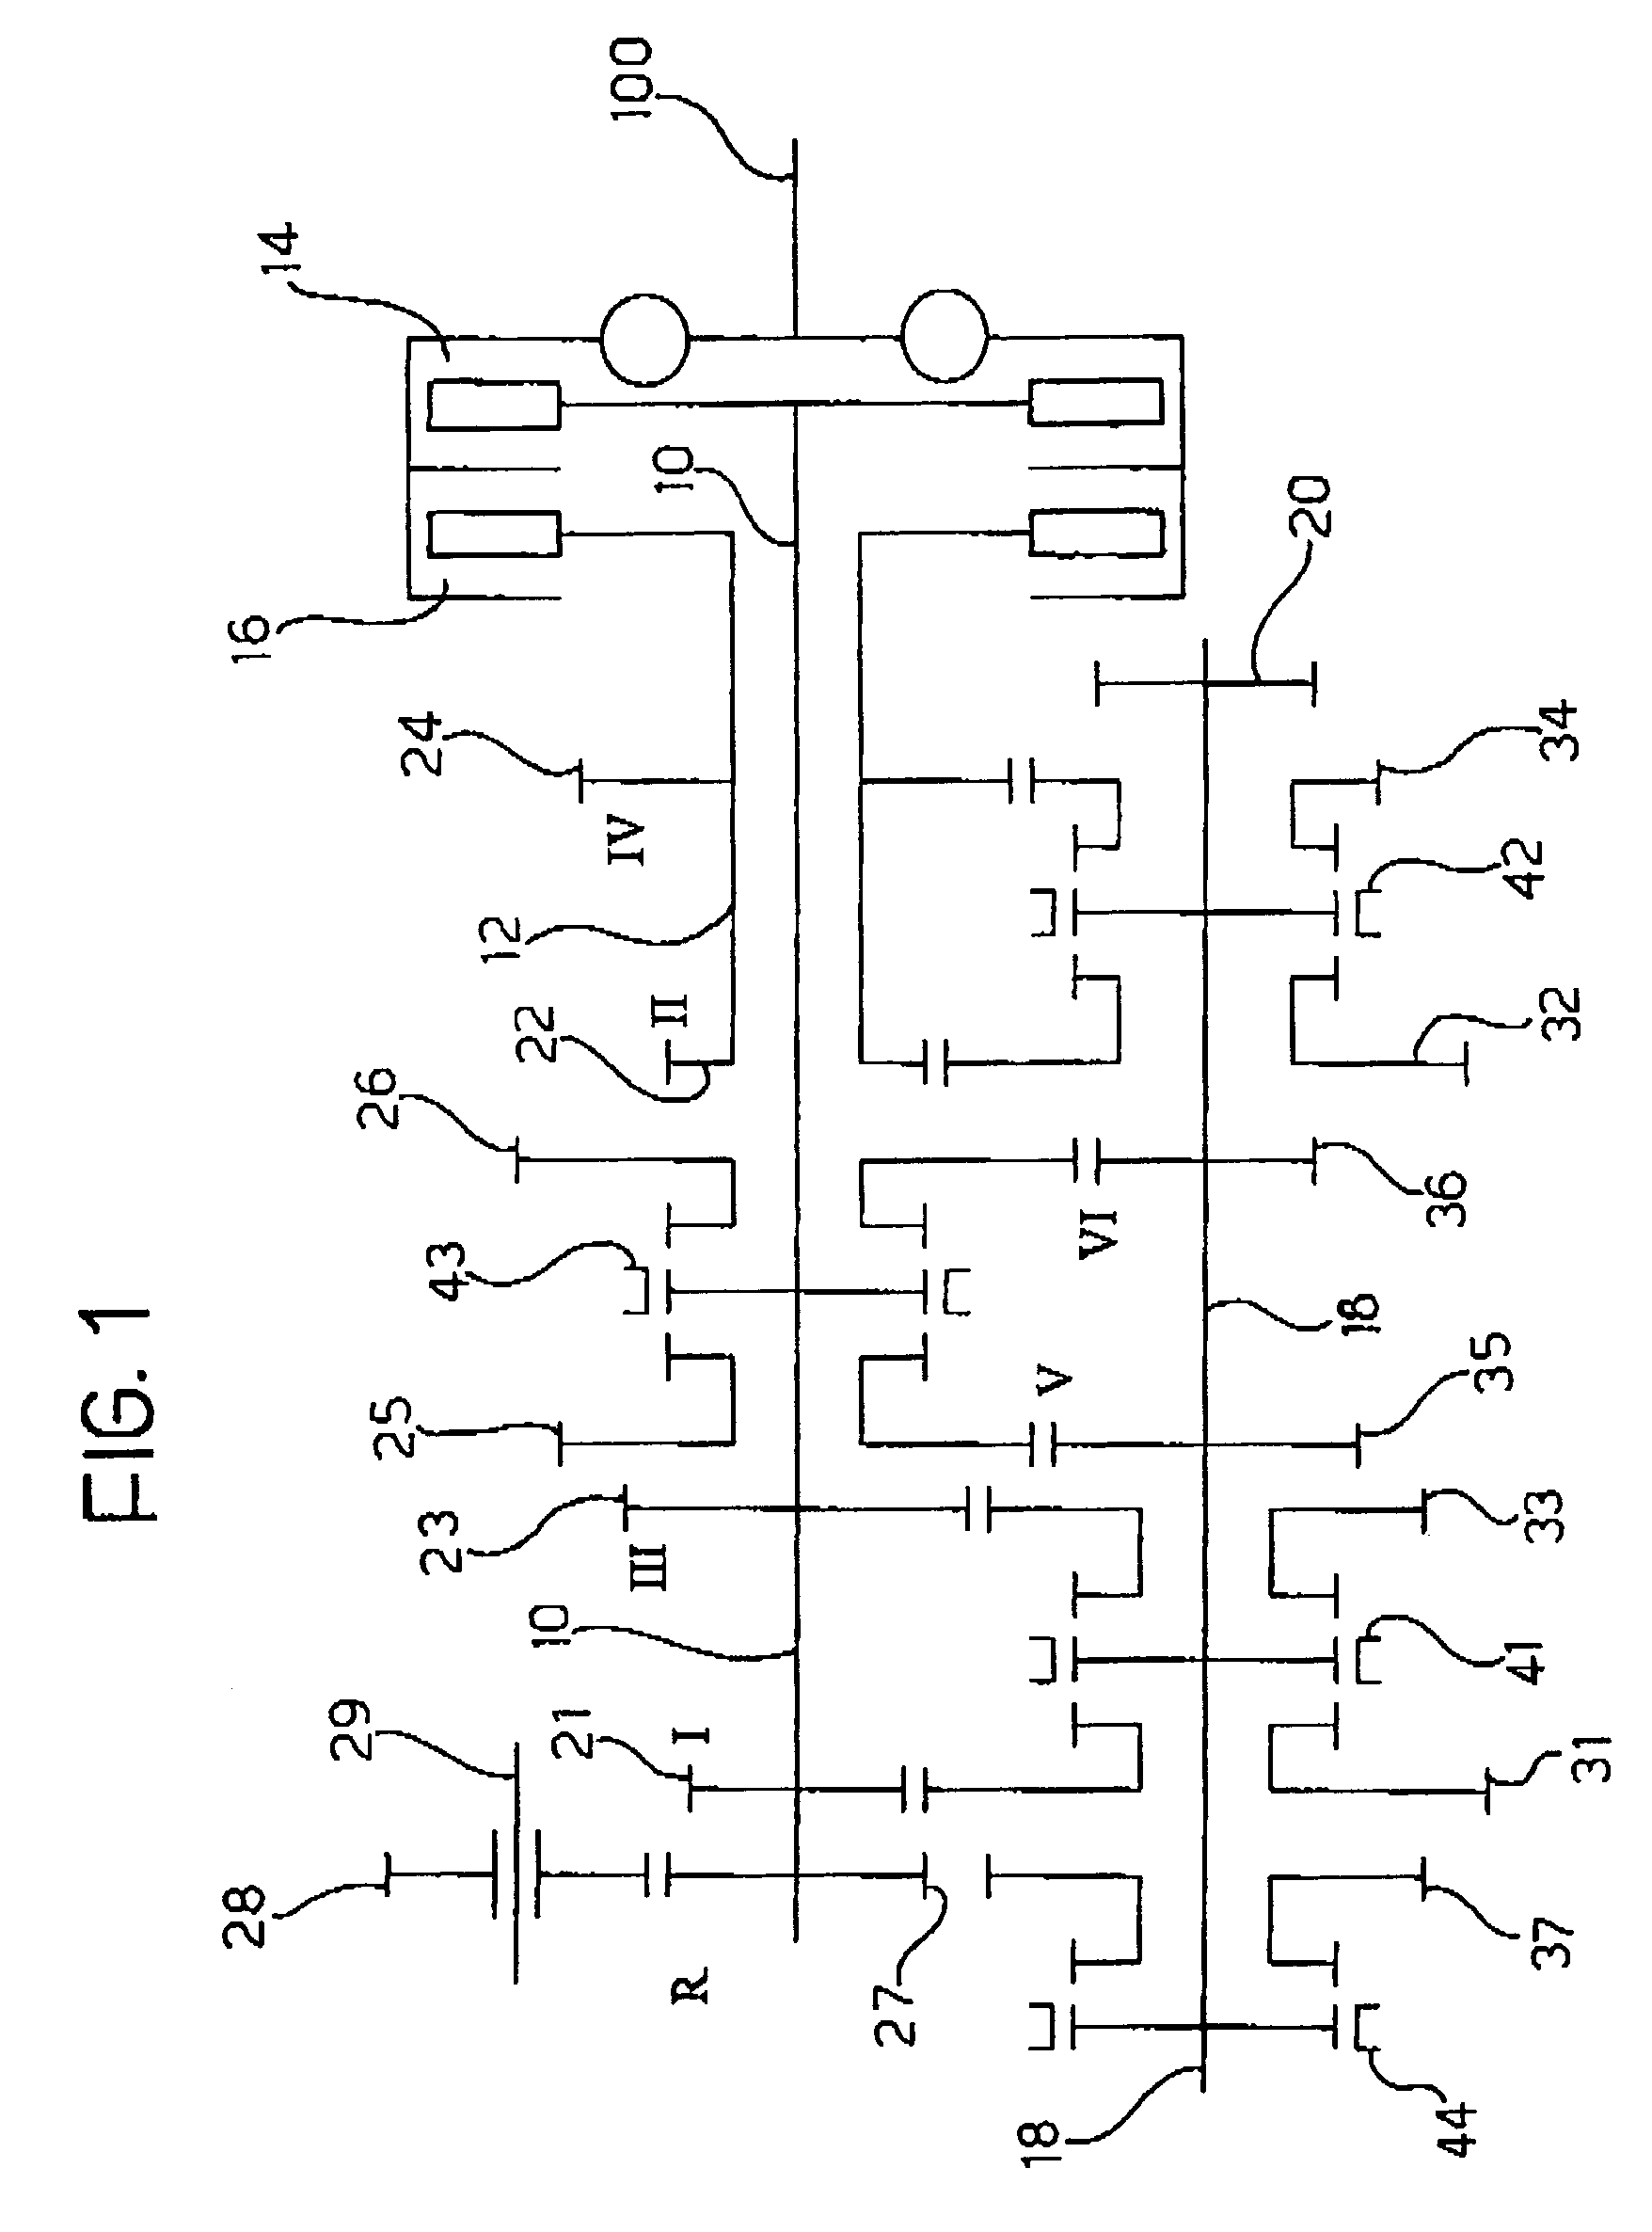 Double-clutch transmission architecture for a motor vehicle